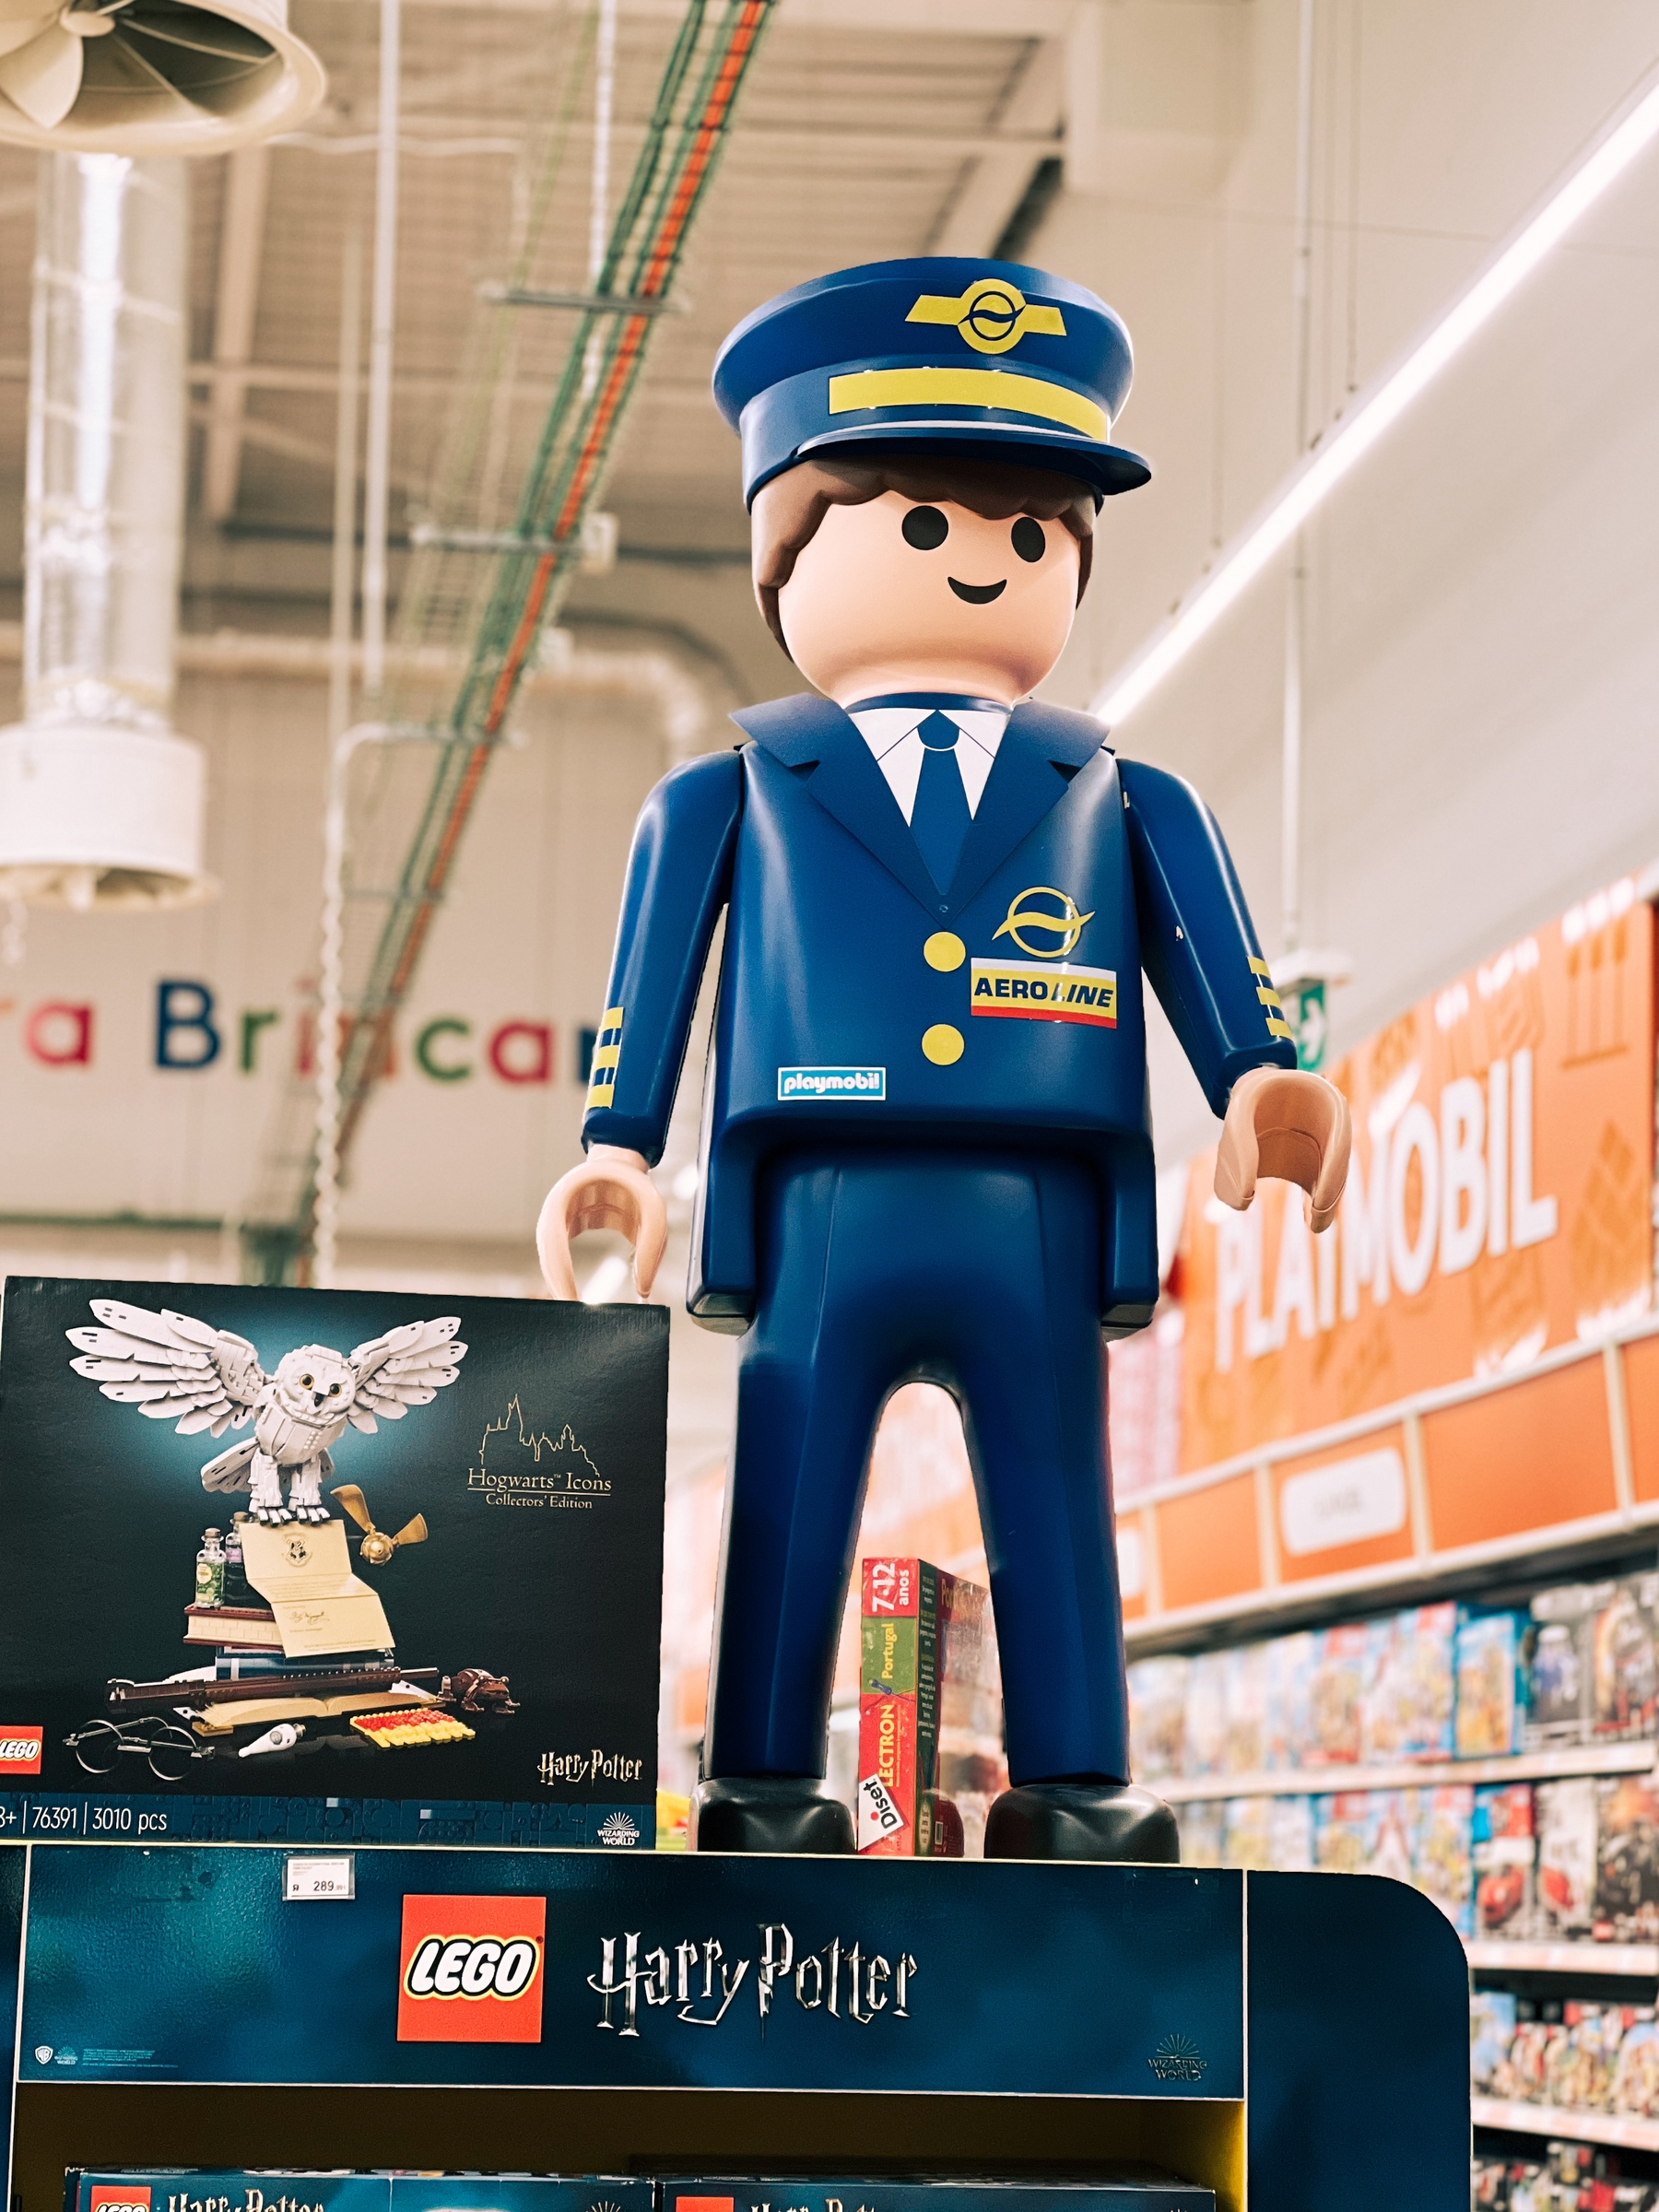 A large Playmobil figure resembling a pilot in a blue uniform, standing atop a Harry Potter LEGO set display shelf in a store.